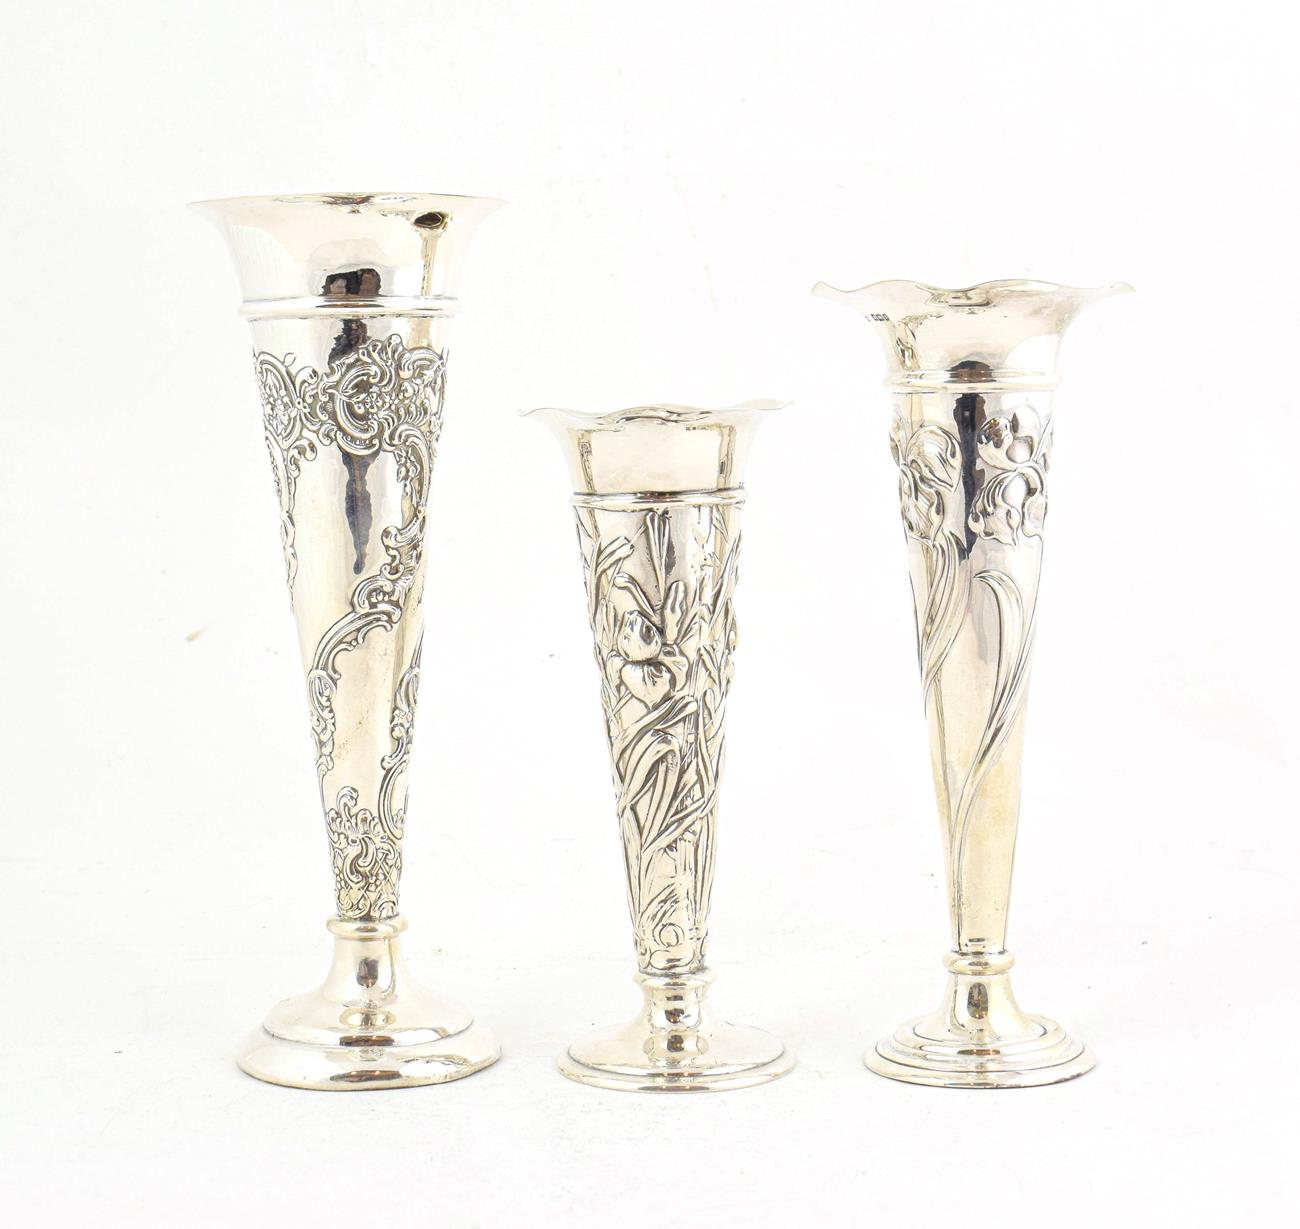 Lot 44 - Three Edward VII or George V Silver Vases, One by William Comyns, London, 1903; One by Mappin...